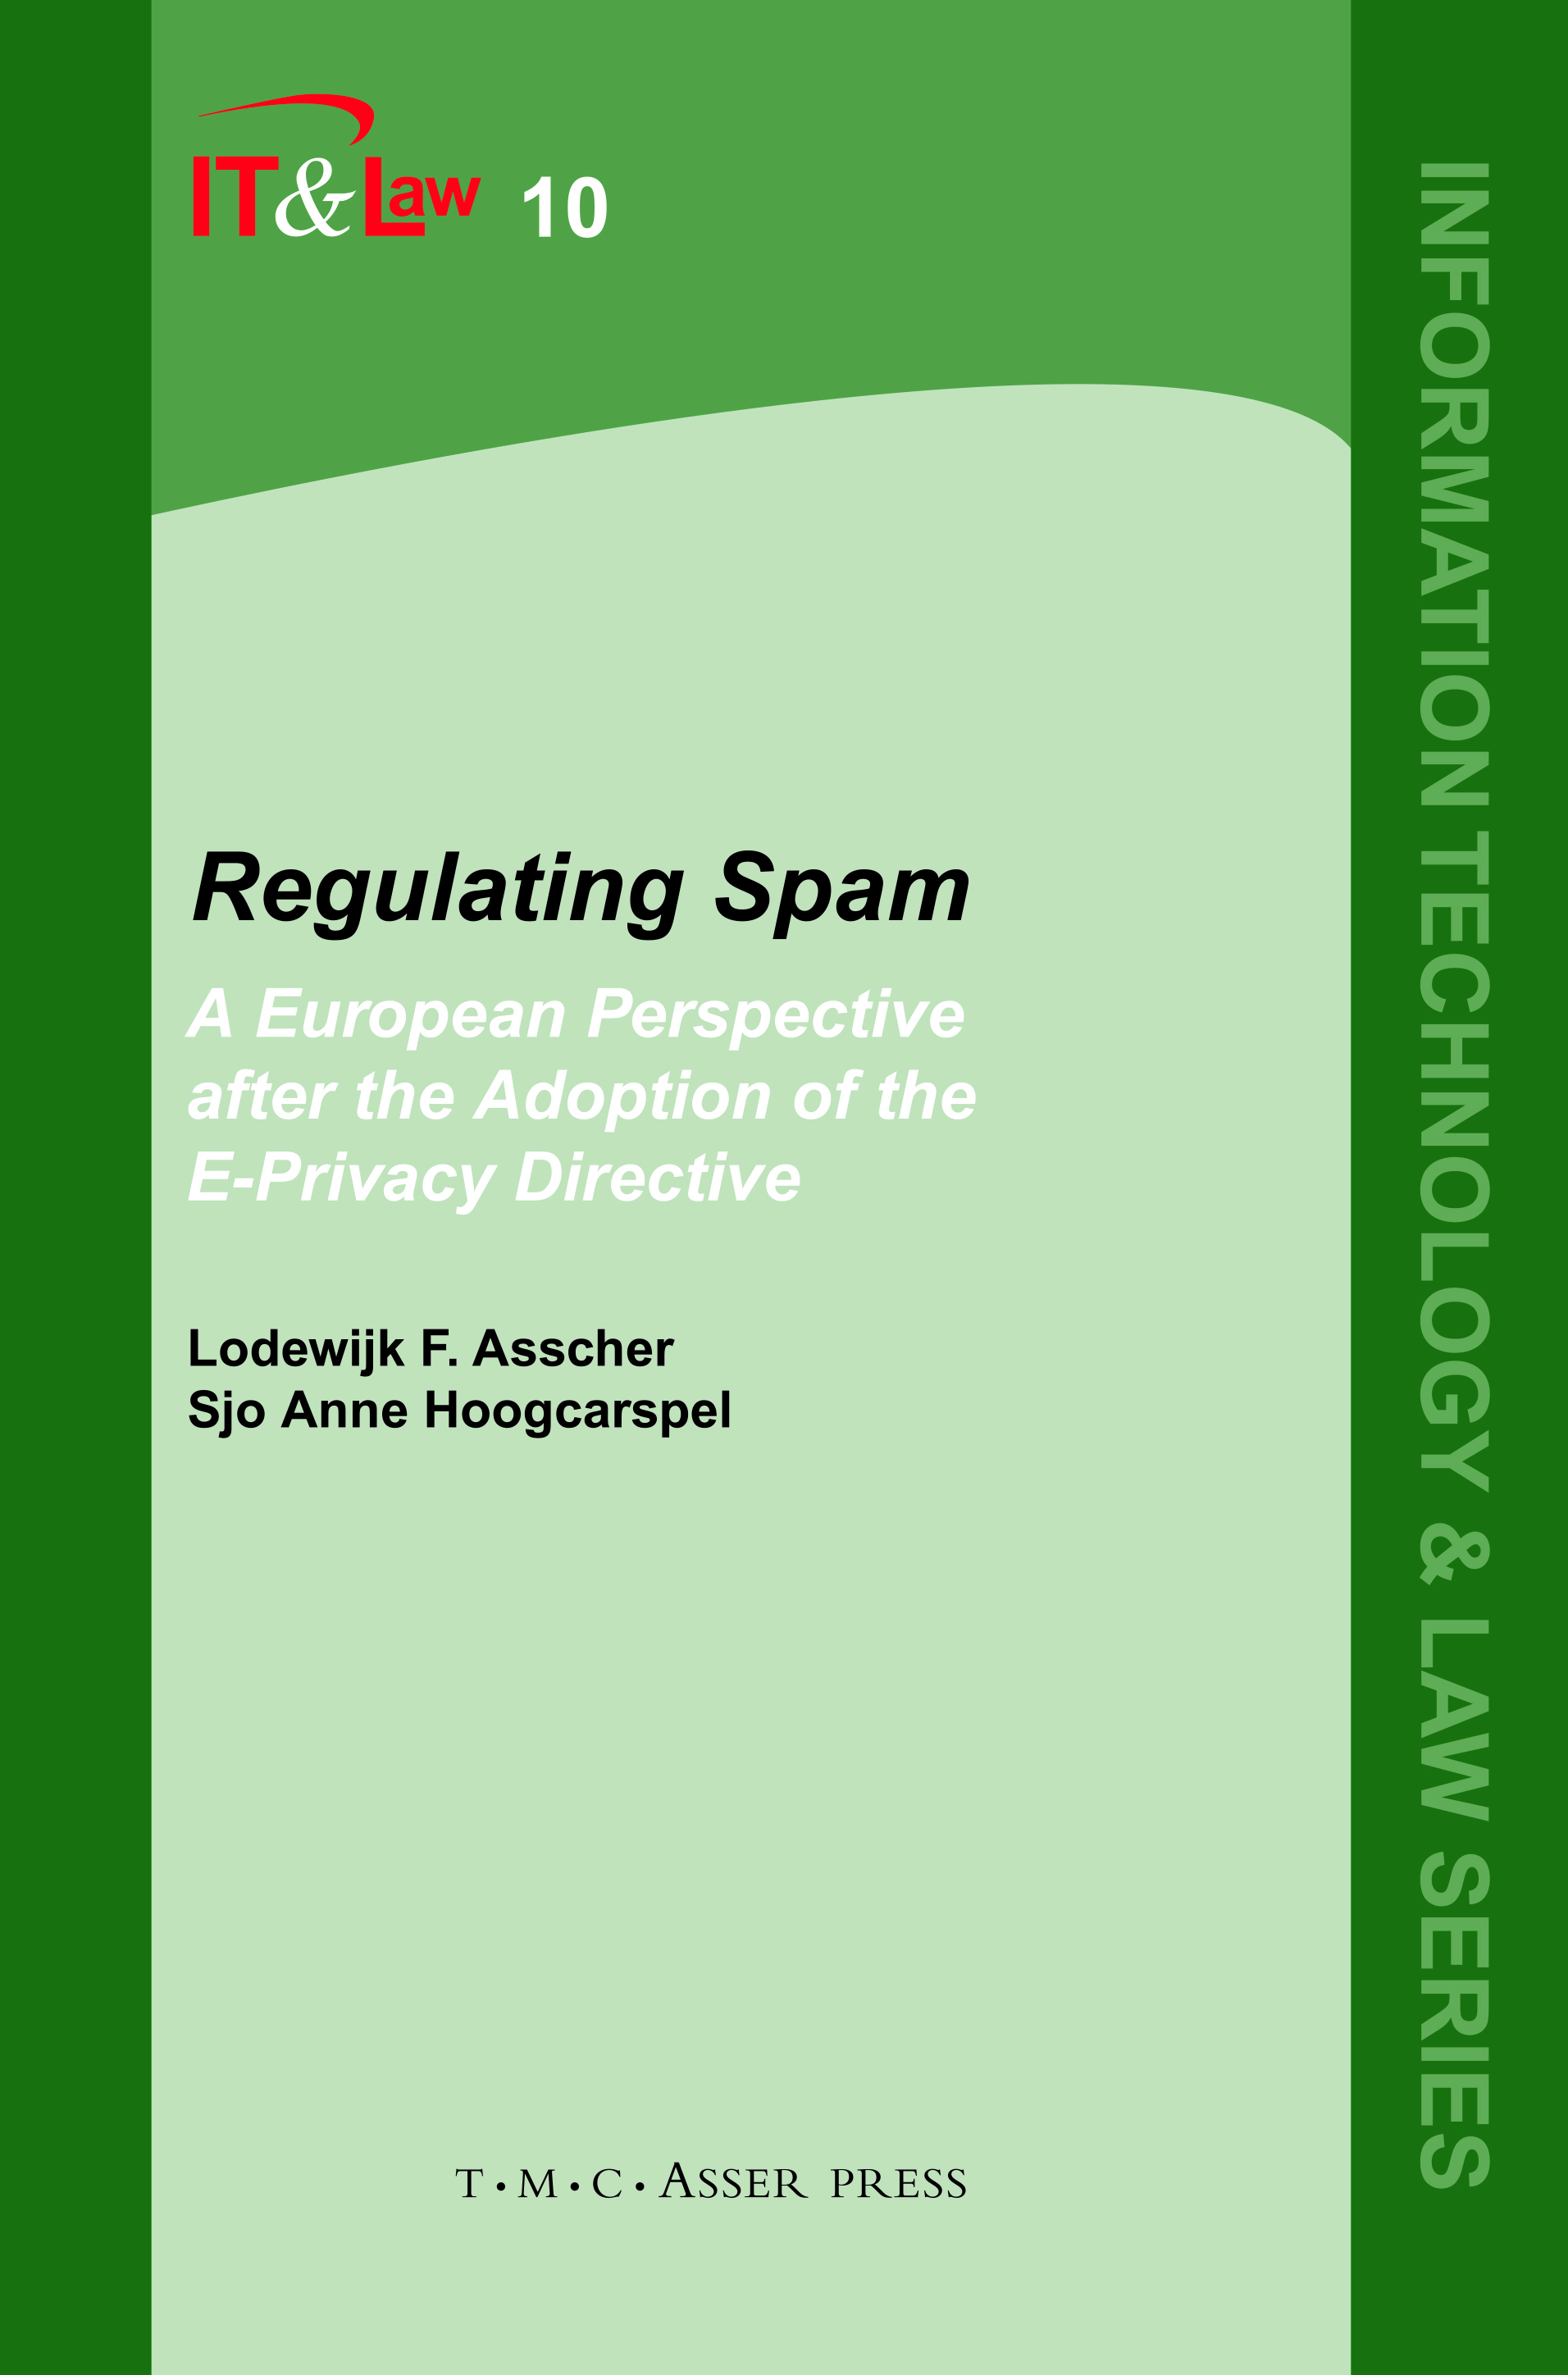 Regulating Spam - A European Perspective after the Adoption of the E-Privacy Directive